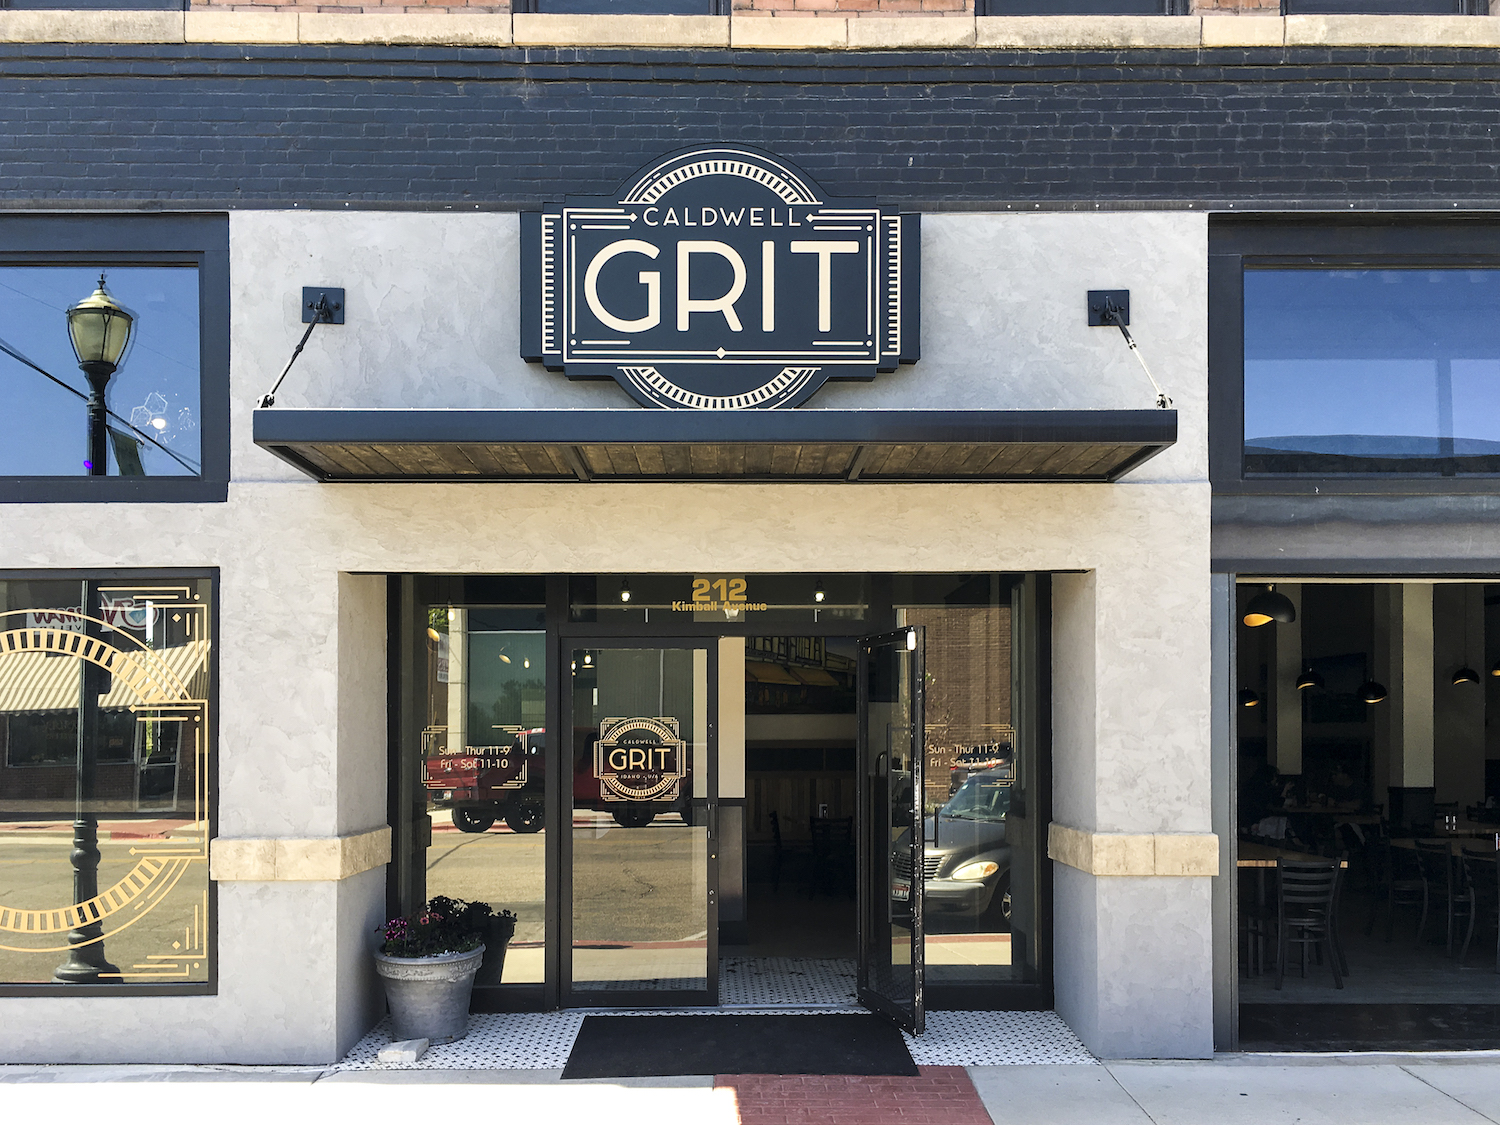 Grit2C is a new restaurant in Caldwell, Idaho.